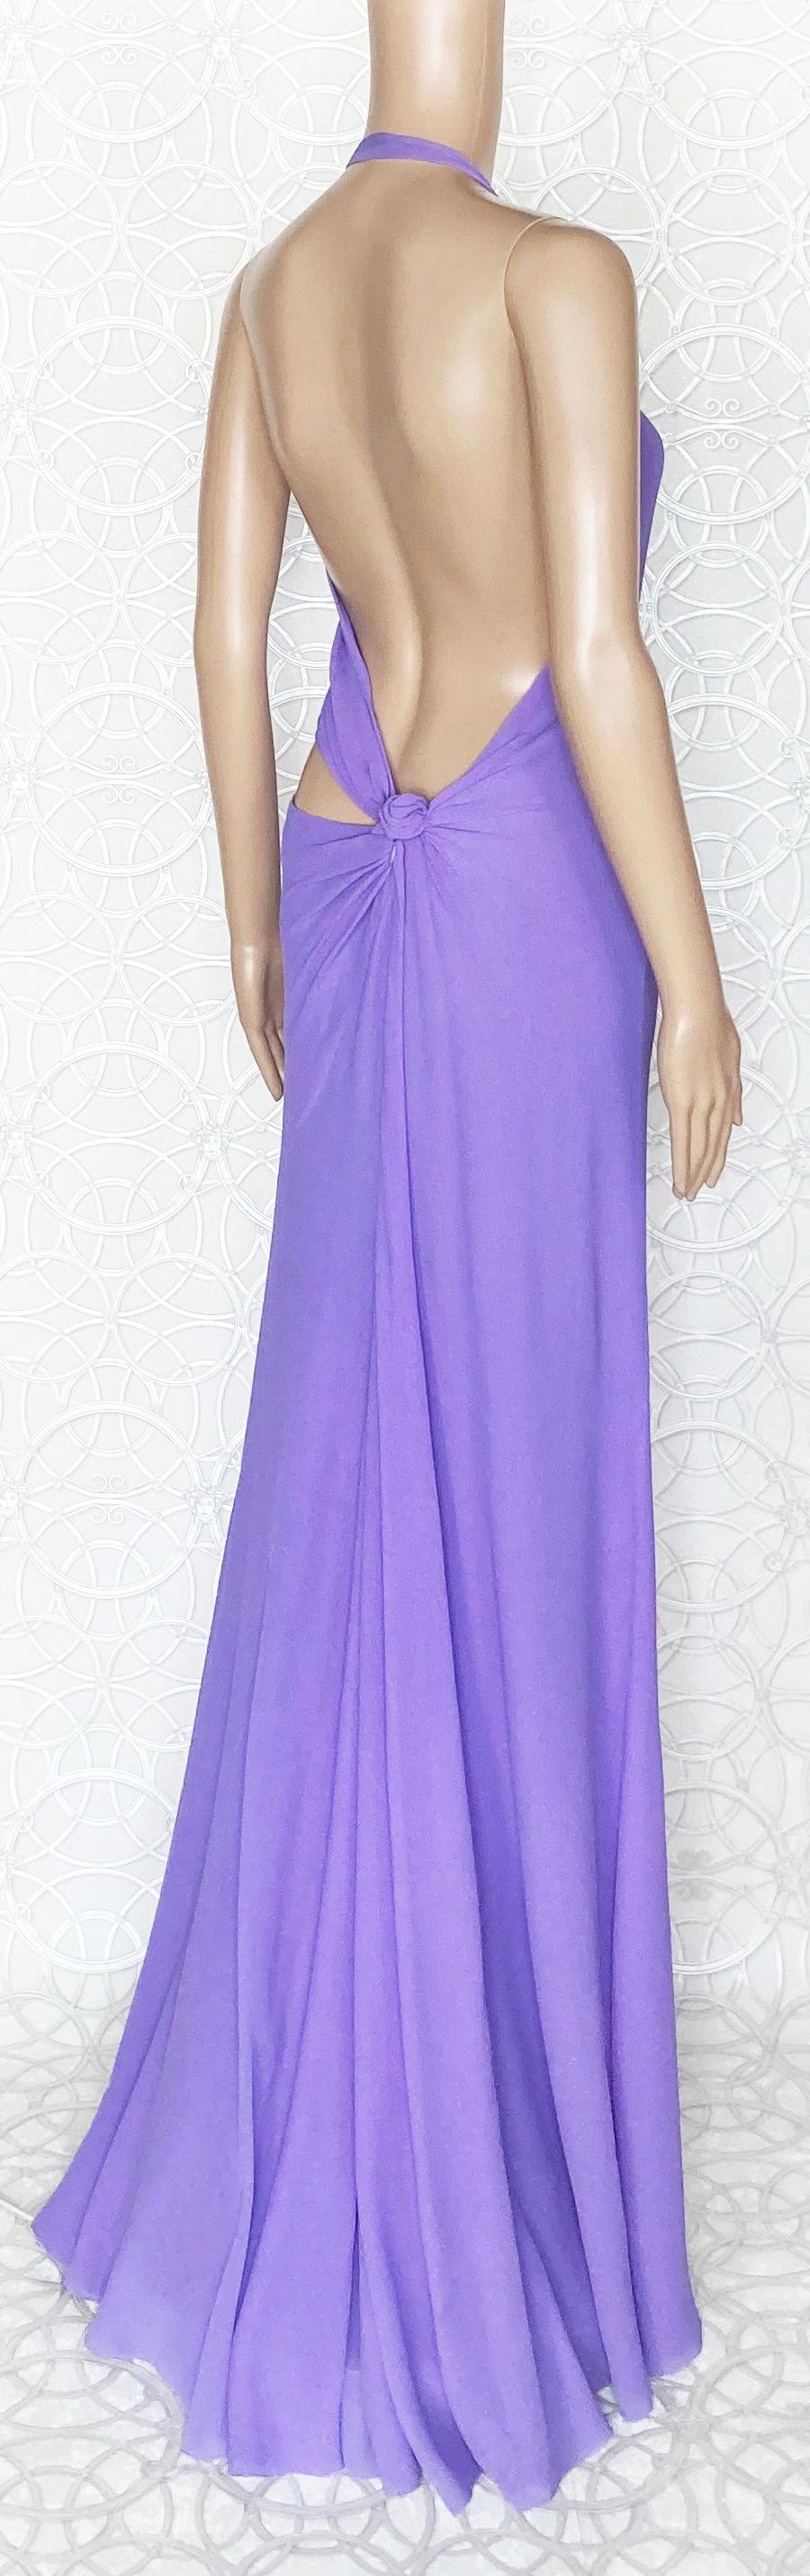 VINTAGE GIANNI VERSACE COUTURE OPEN BACK LILAC SILK DRESS Size 42 - 6 8